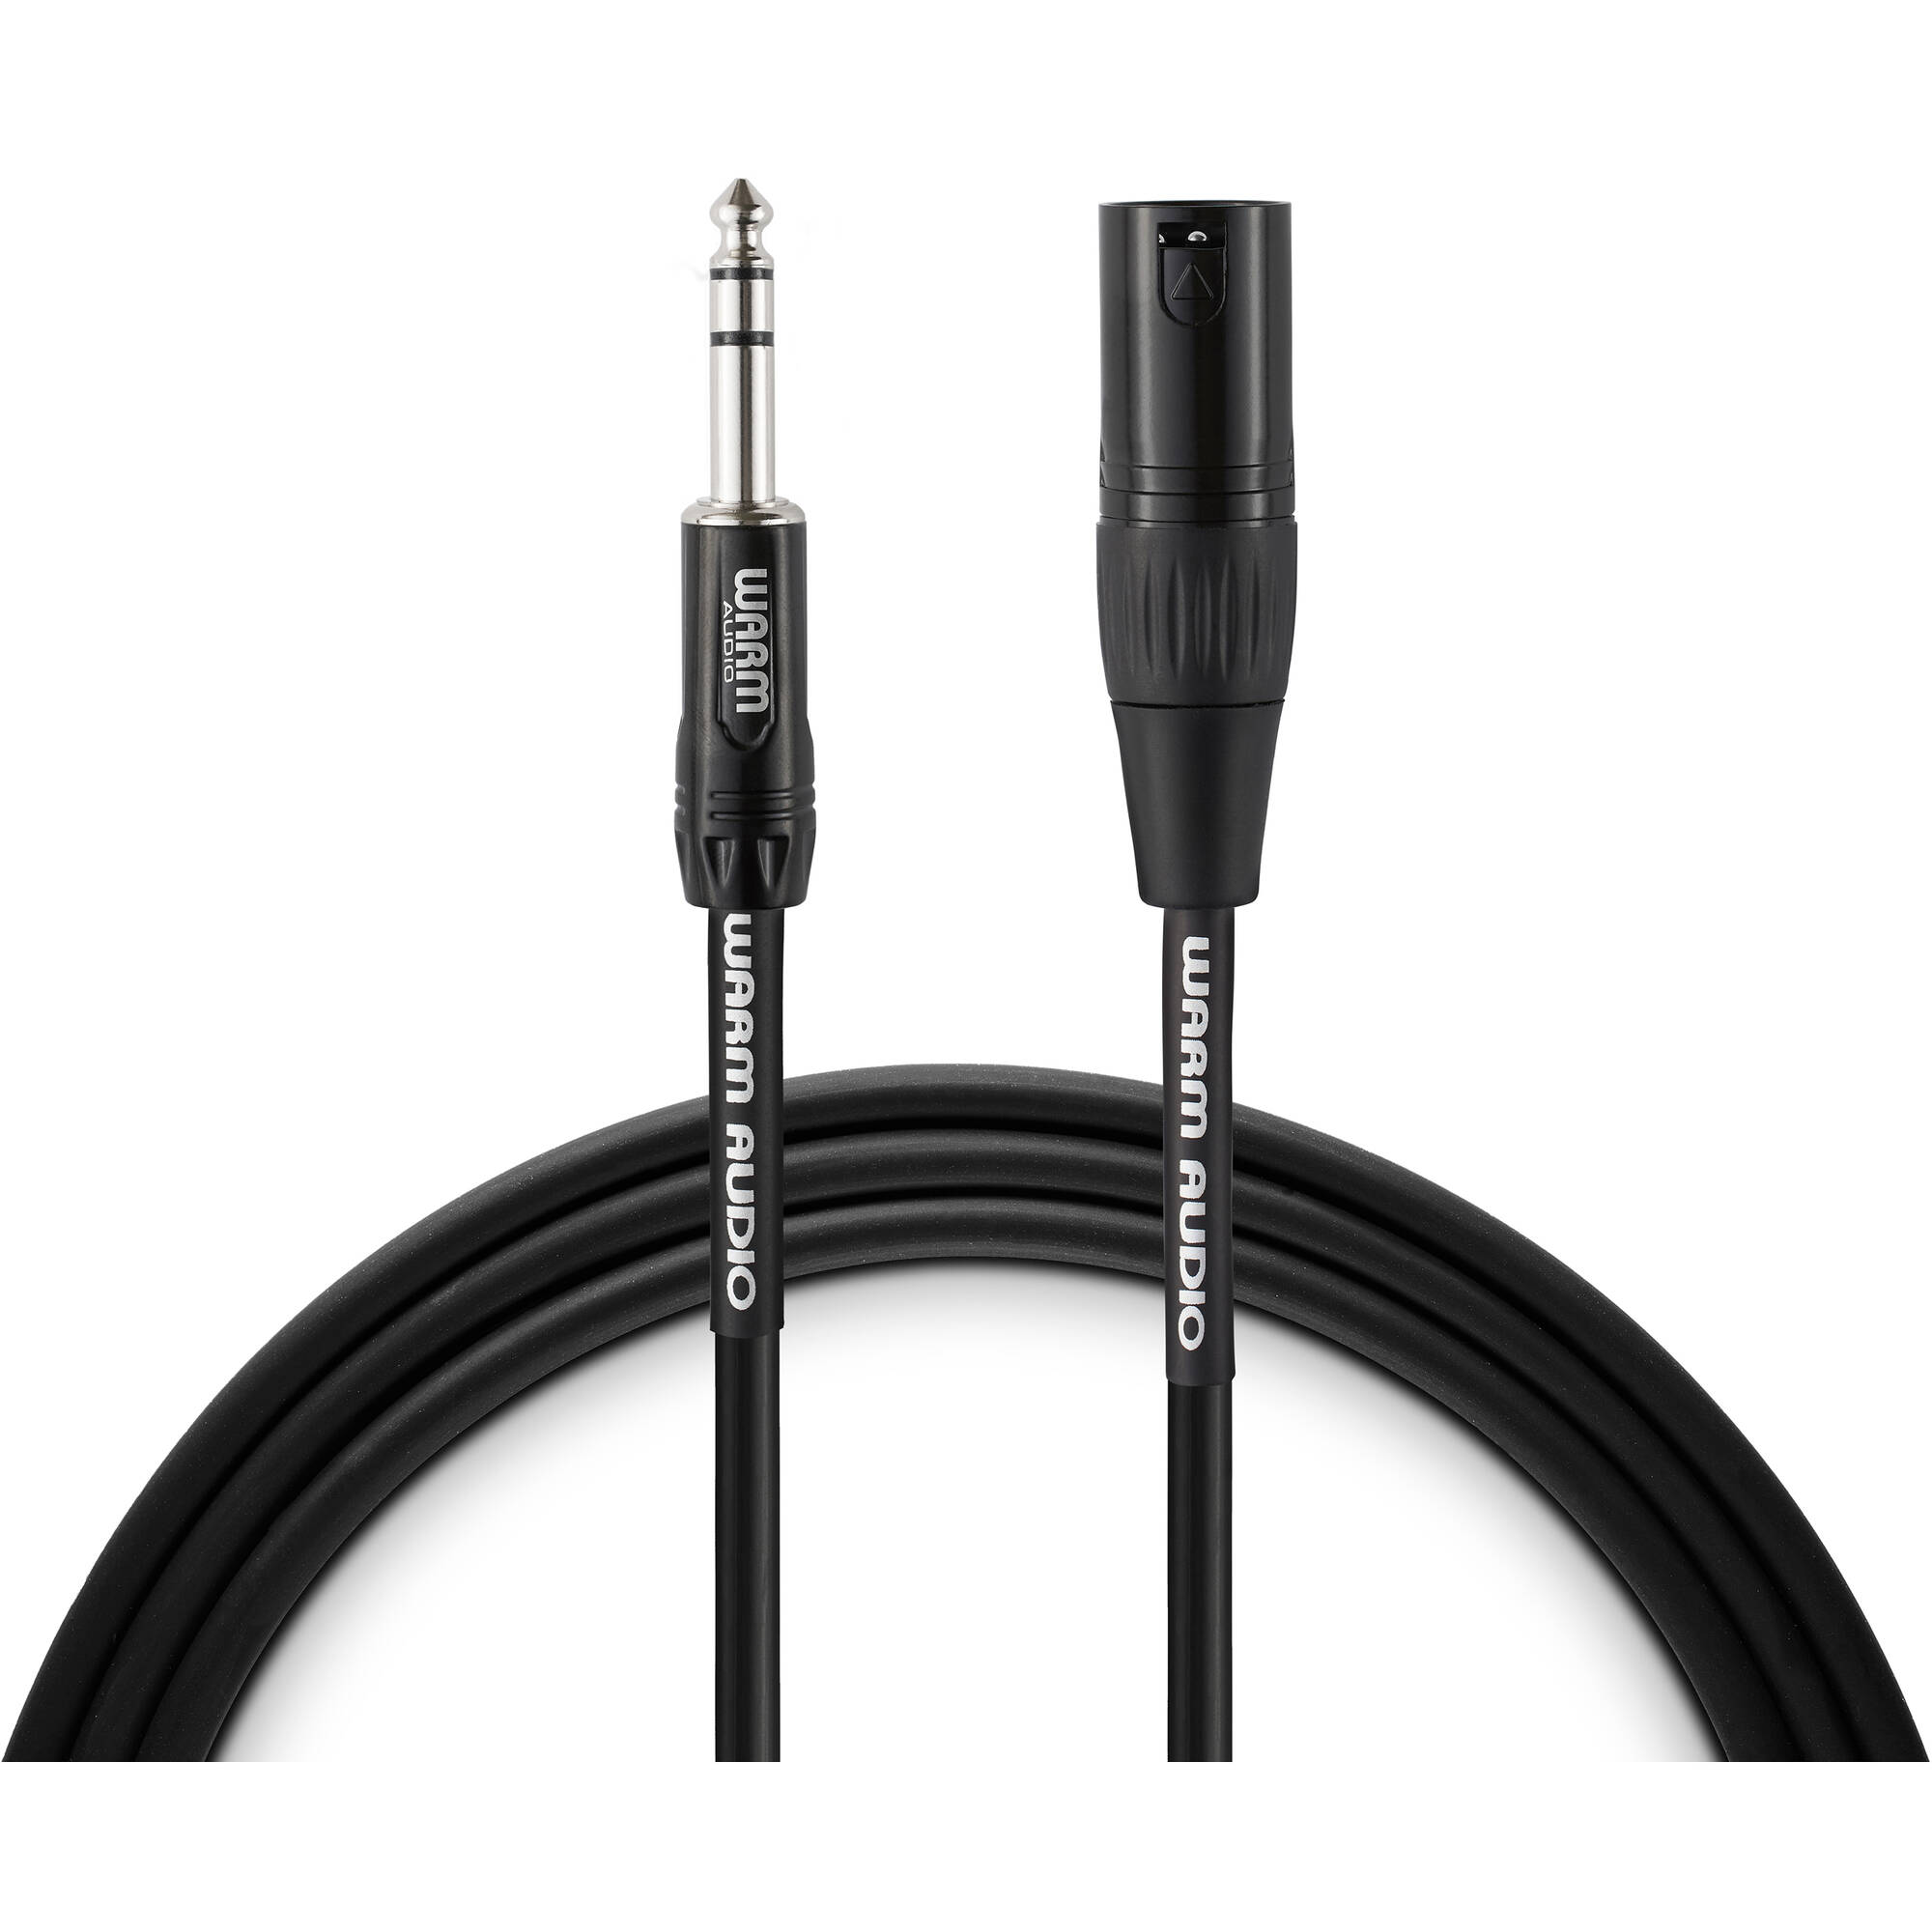 Warm Audio Pro Silver XLR Male to TRS Male Cable - 3-foot